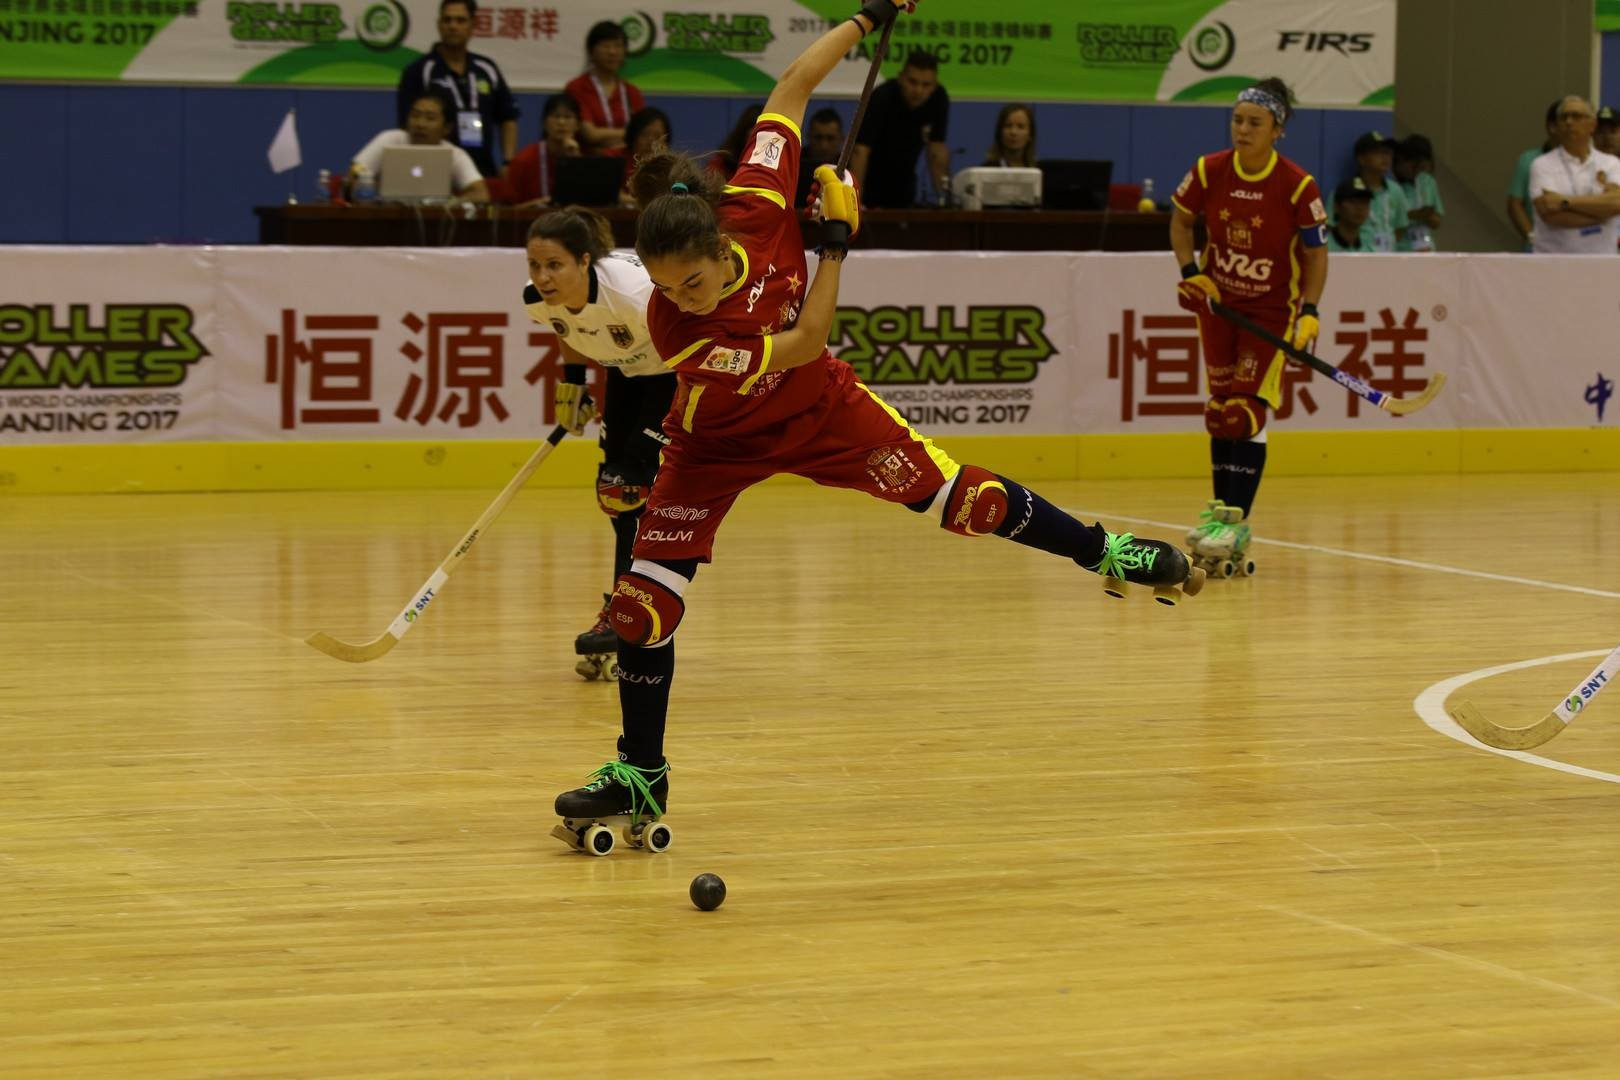 Finalists confirmed for rink hockey competitions at World Roller Games